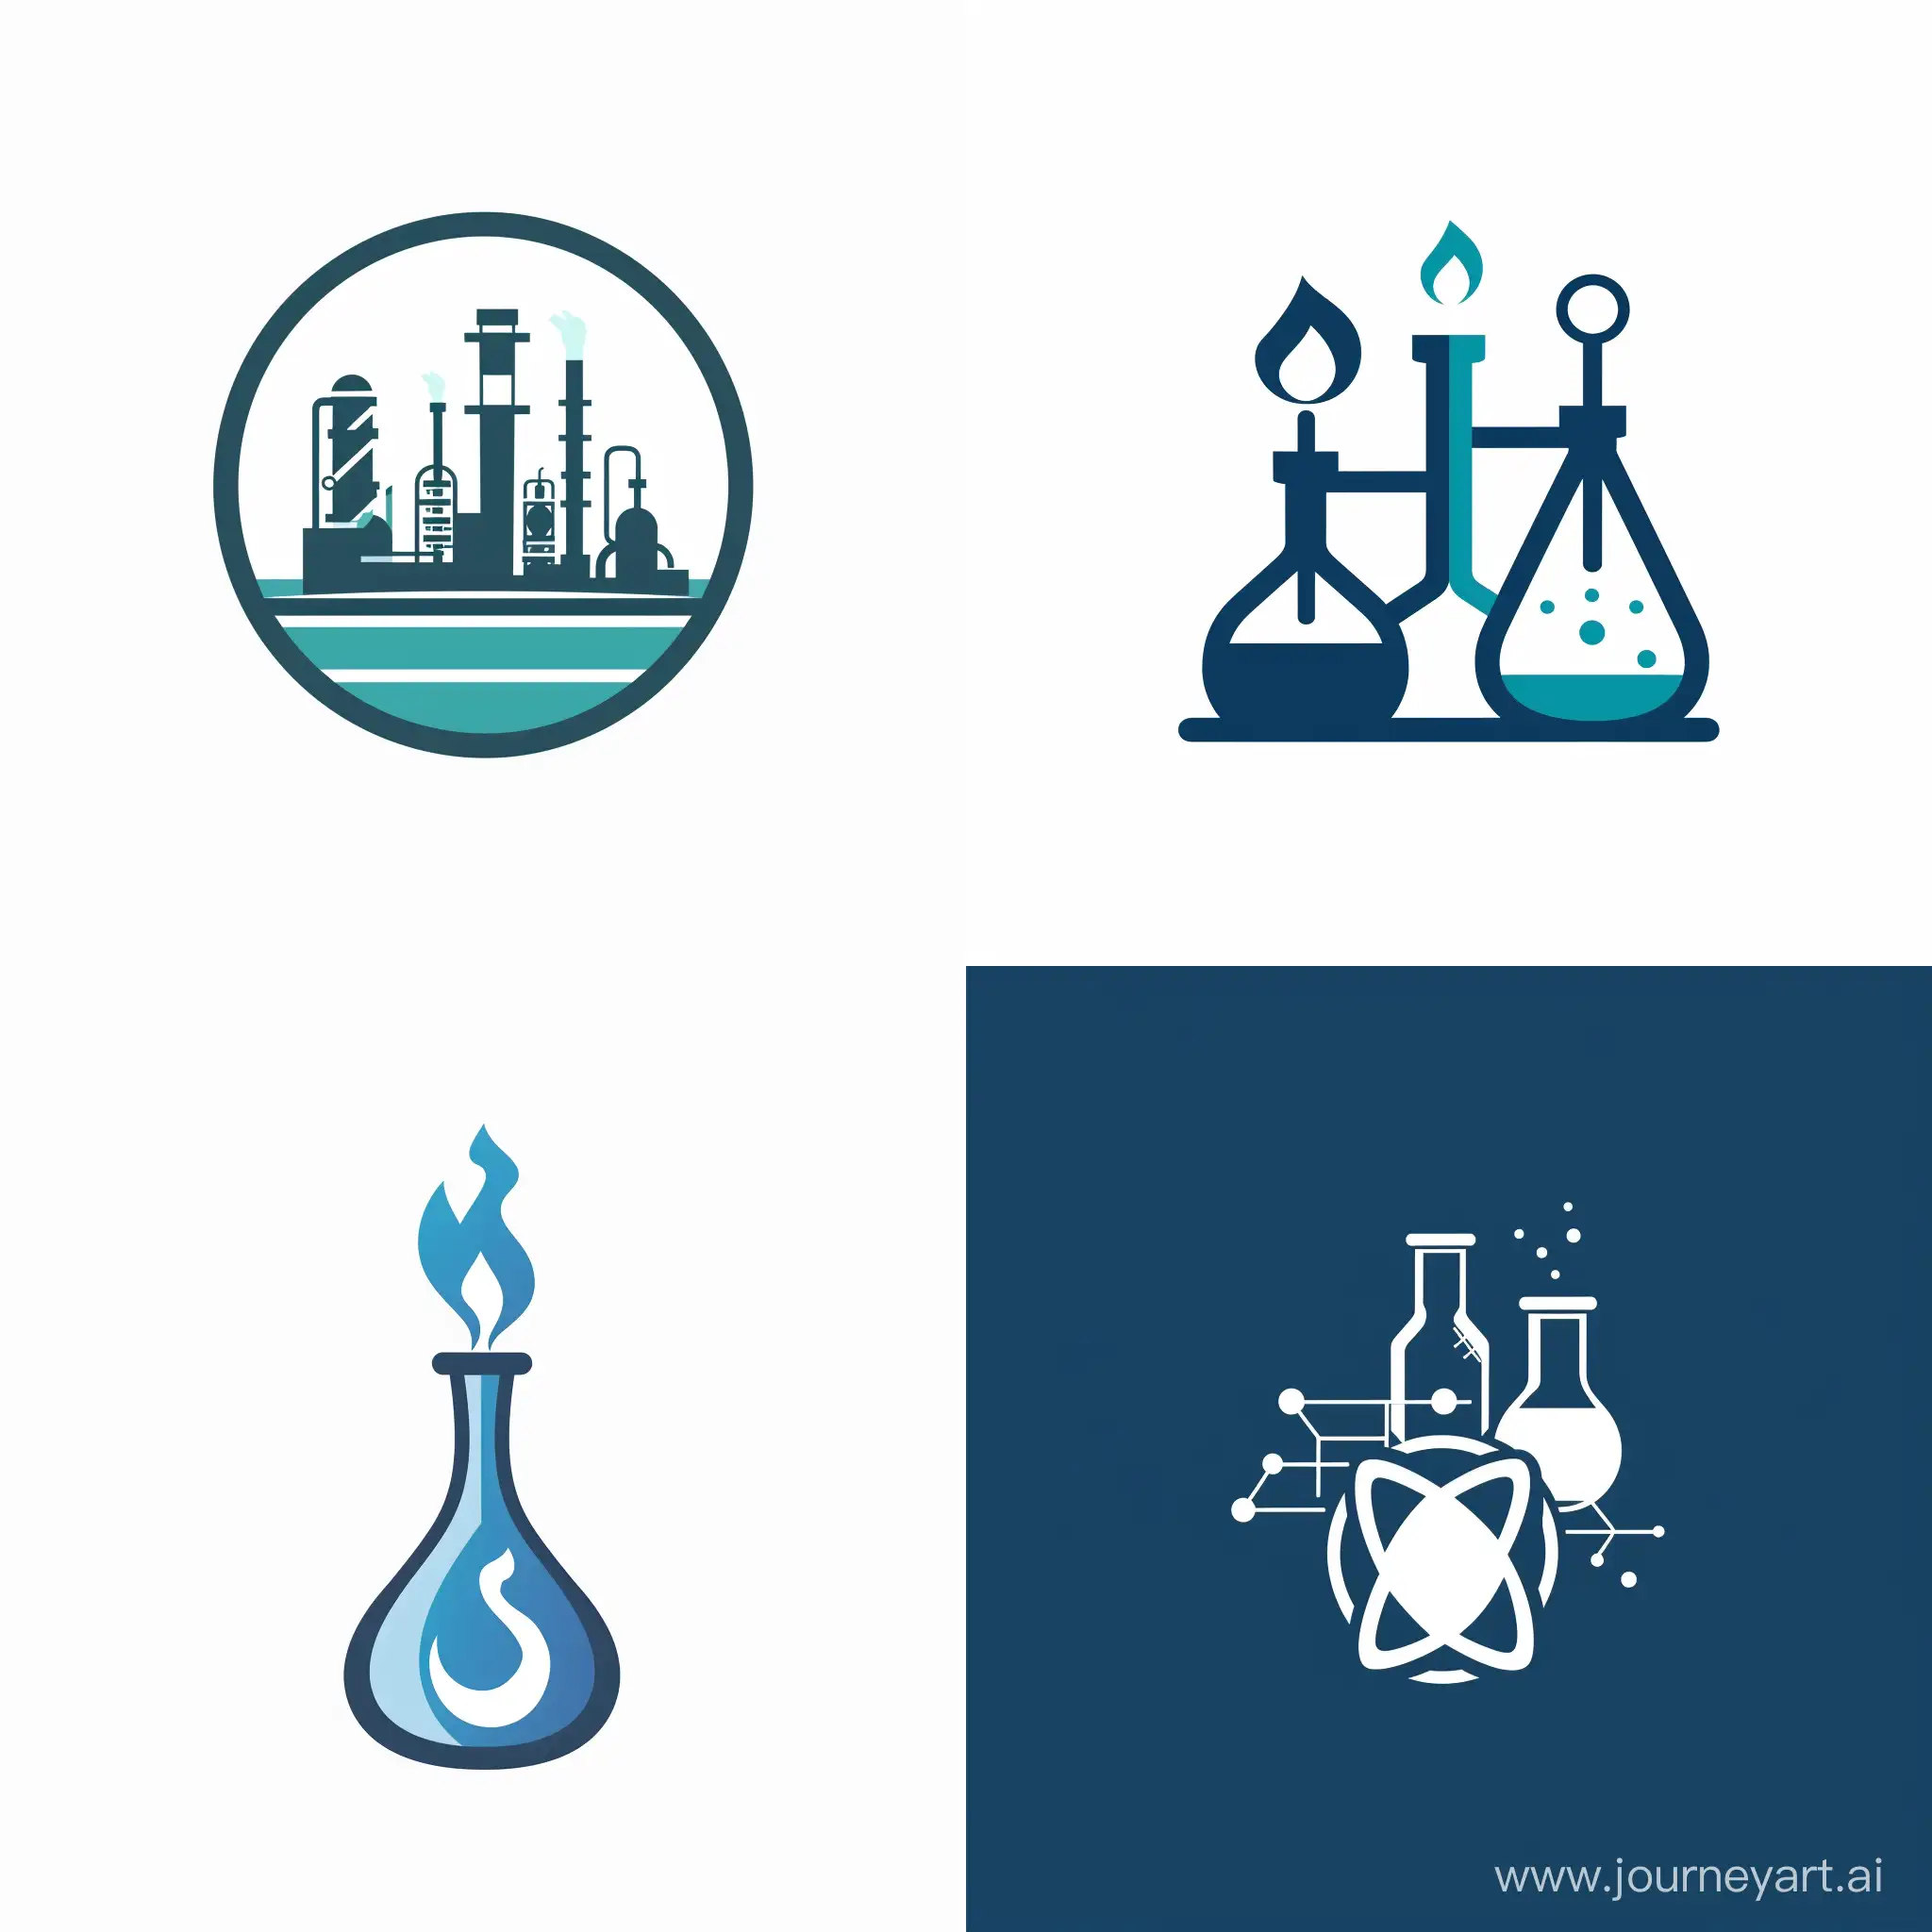 I want a logo for a company in the field of chemical engineering, fuel, catalyst, polymer, biotechnology, clean, petrochemical, power plant, refinery, etc. 